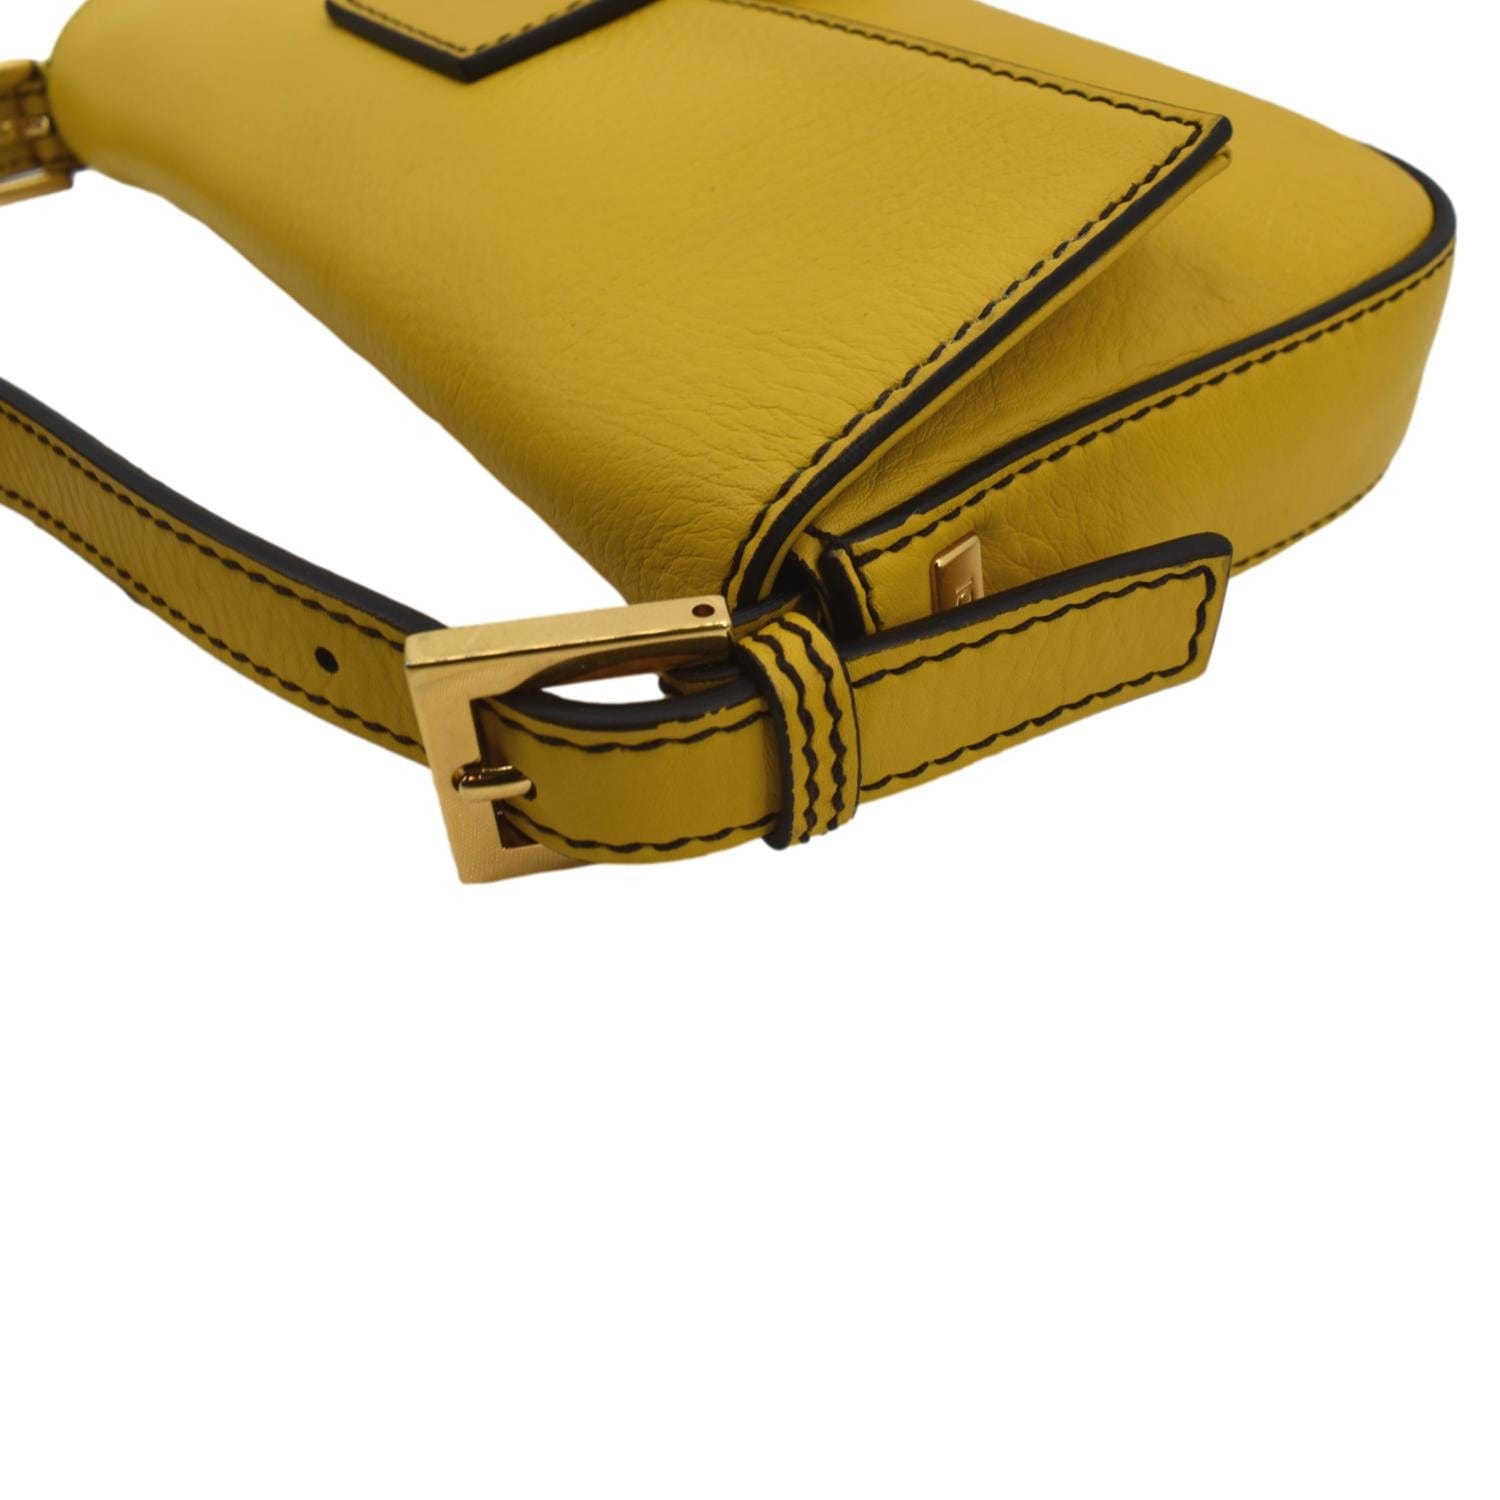 Fendi - Authenticated Baguette Convertible Bag - Leather Yellow Plain For Man, Very Good condition